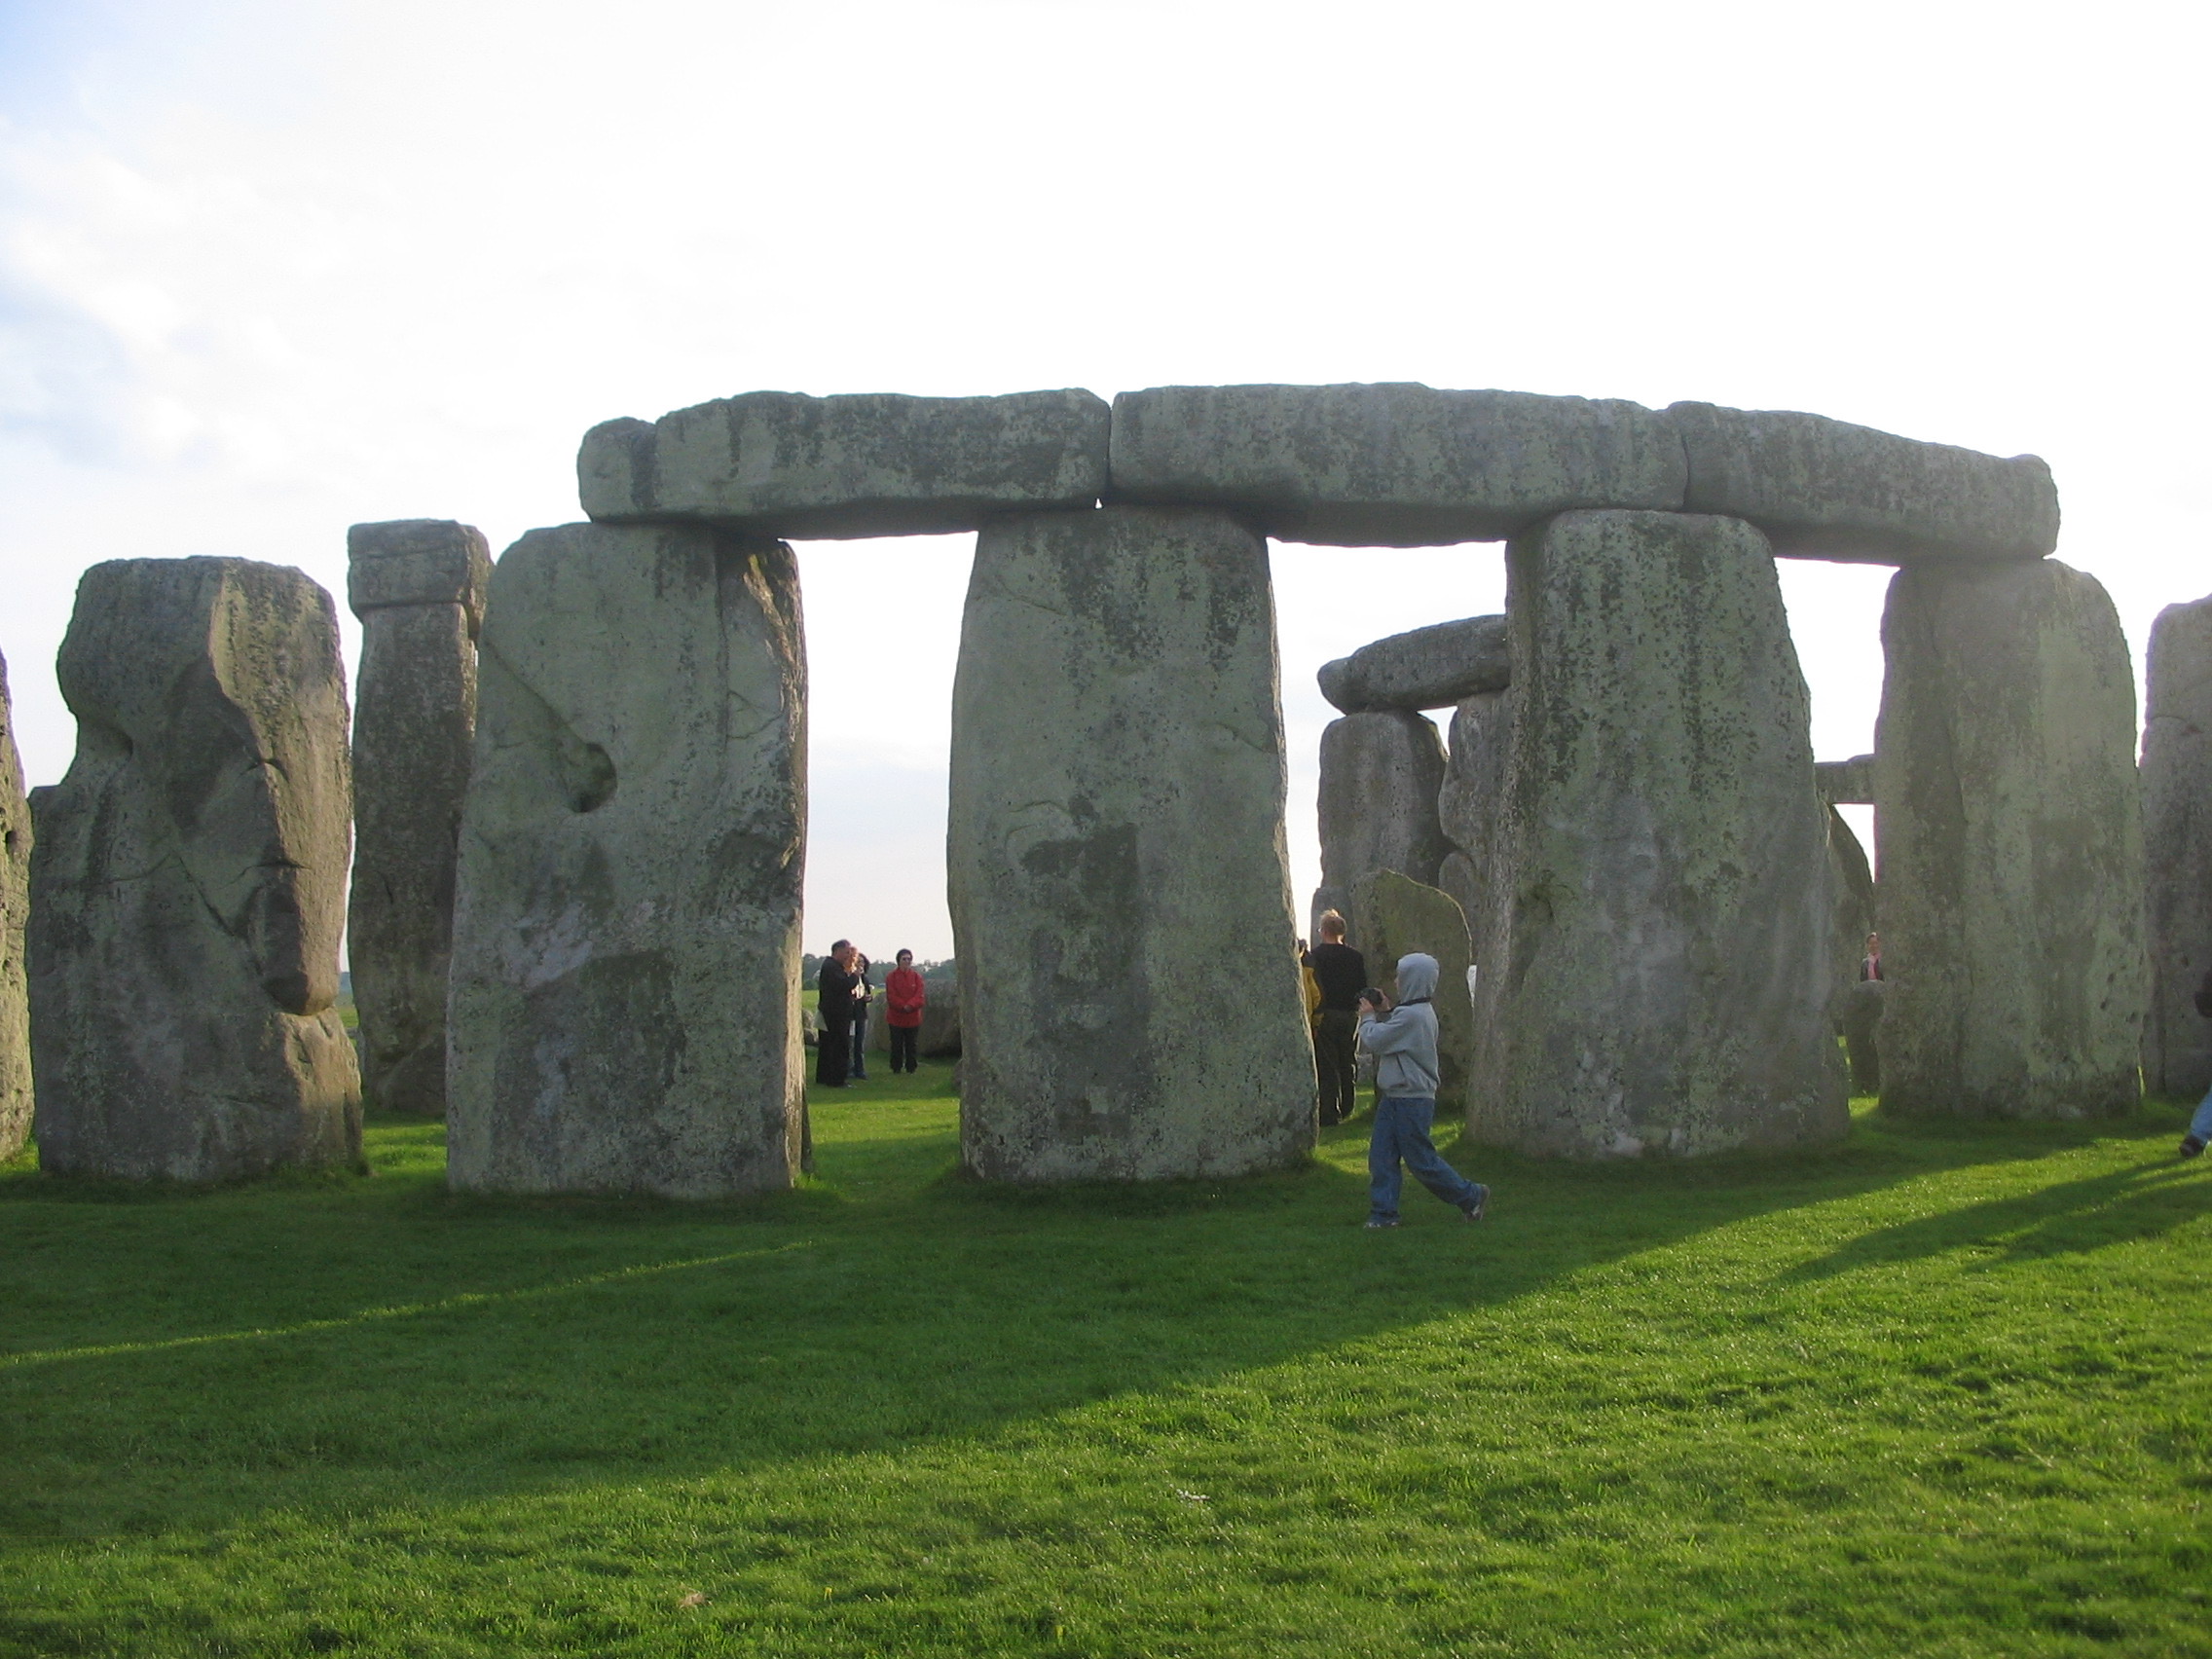 a group of people standing in a grassy area with large stones with Stonehenge in the background